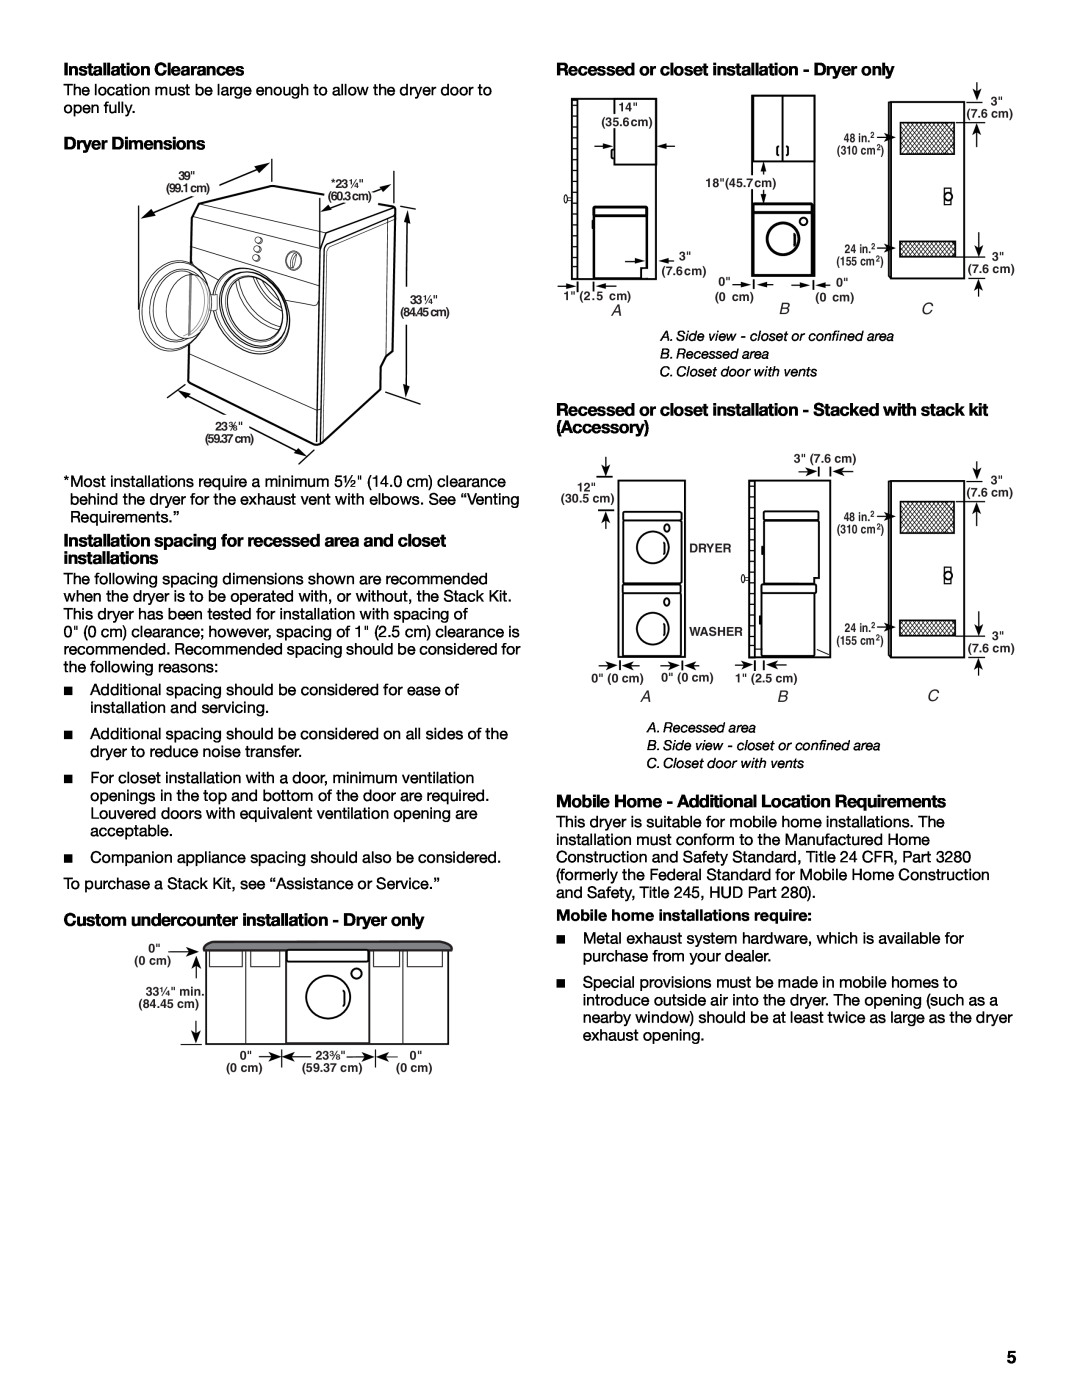 Whirlpool 8578567 manual Installation Clearances, Recessed or closet installation - Dryer only, Dryer Dimensions 